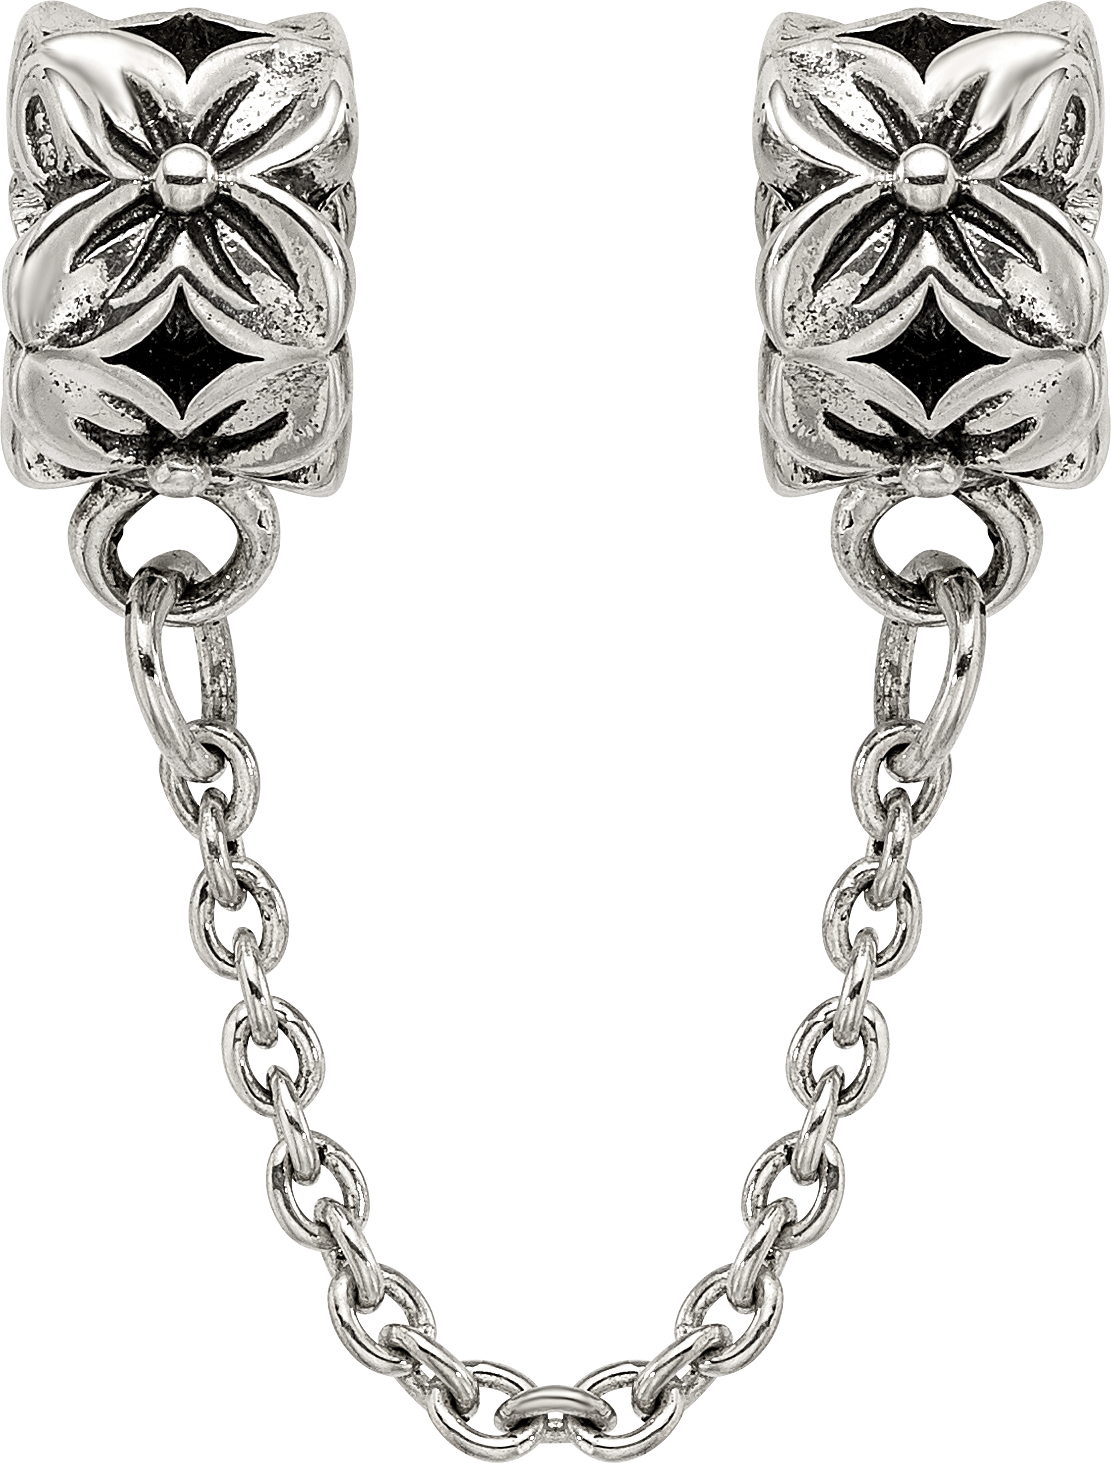 Sterling Silver Reflections Security Chain Floral Bead